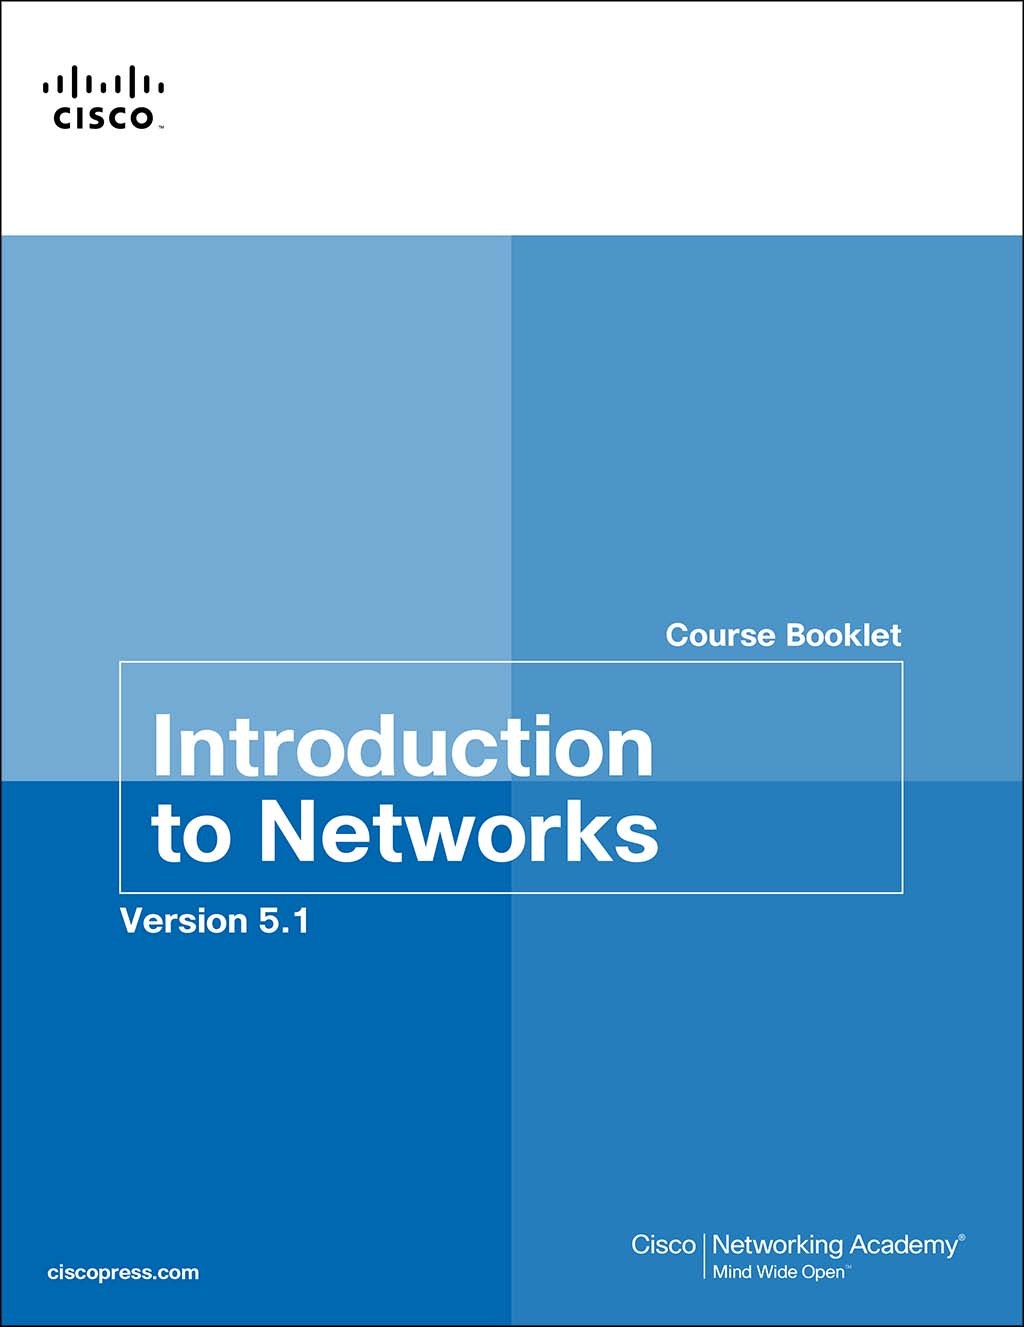 Introduction to Networks Course Booklet v5.1